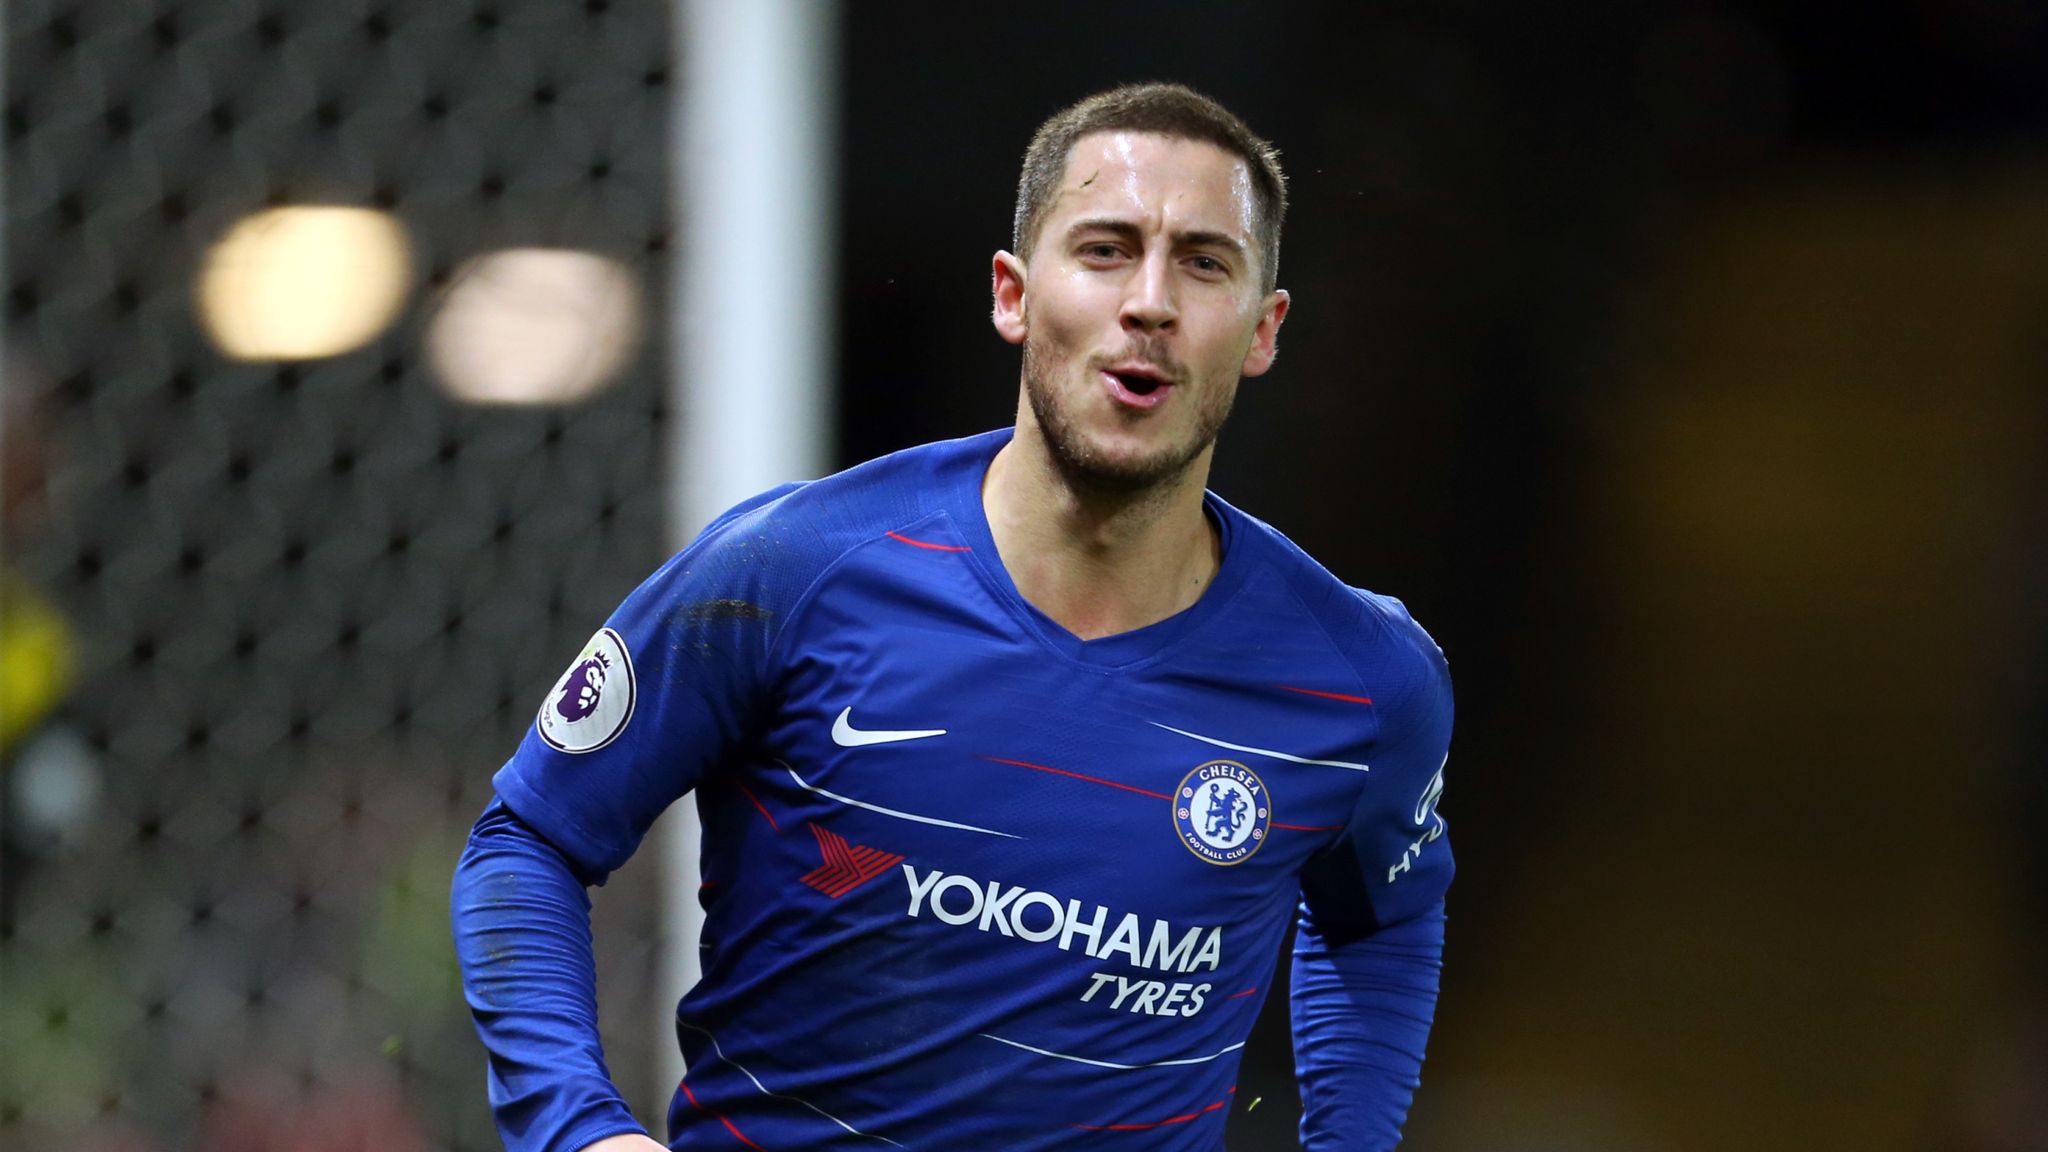 Chelsea forward Eden Hazard says he is kicked because he is 'too good' |  Football News | Sky Sports